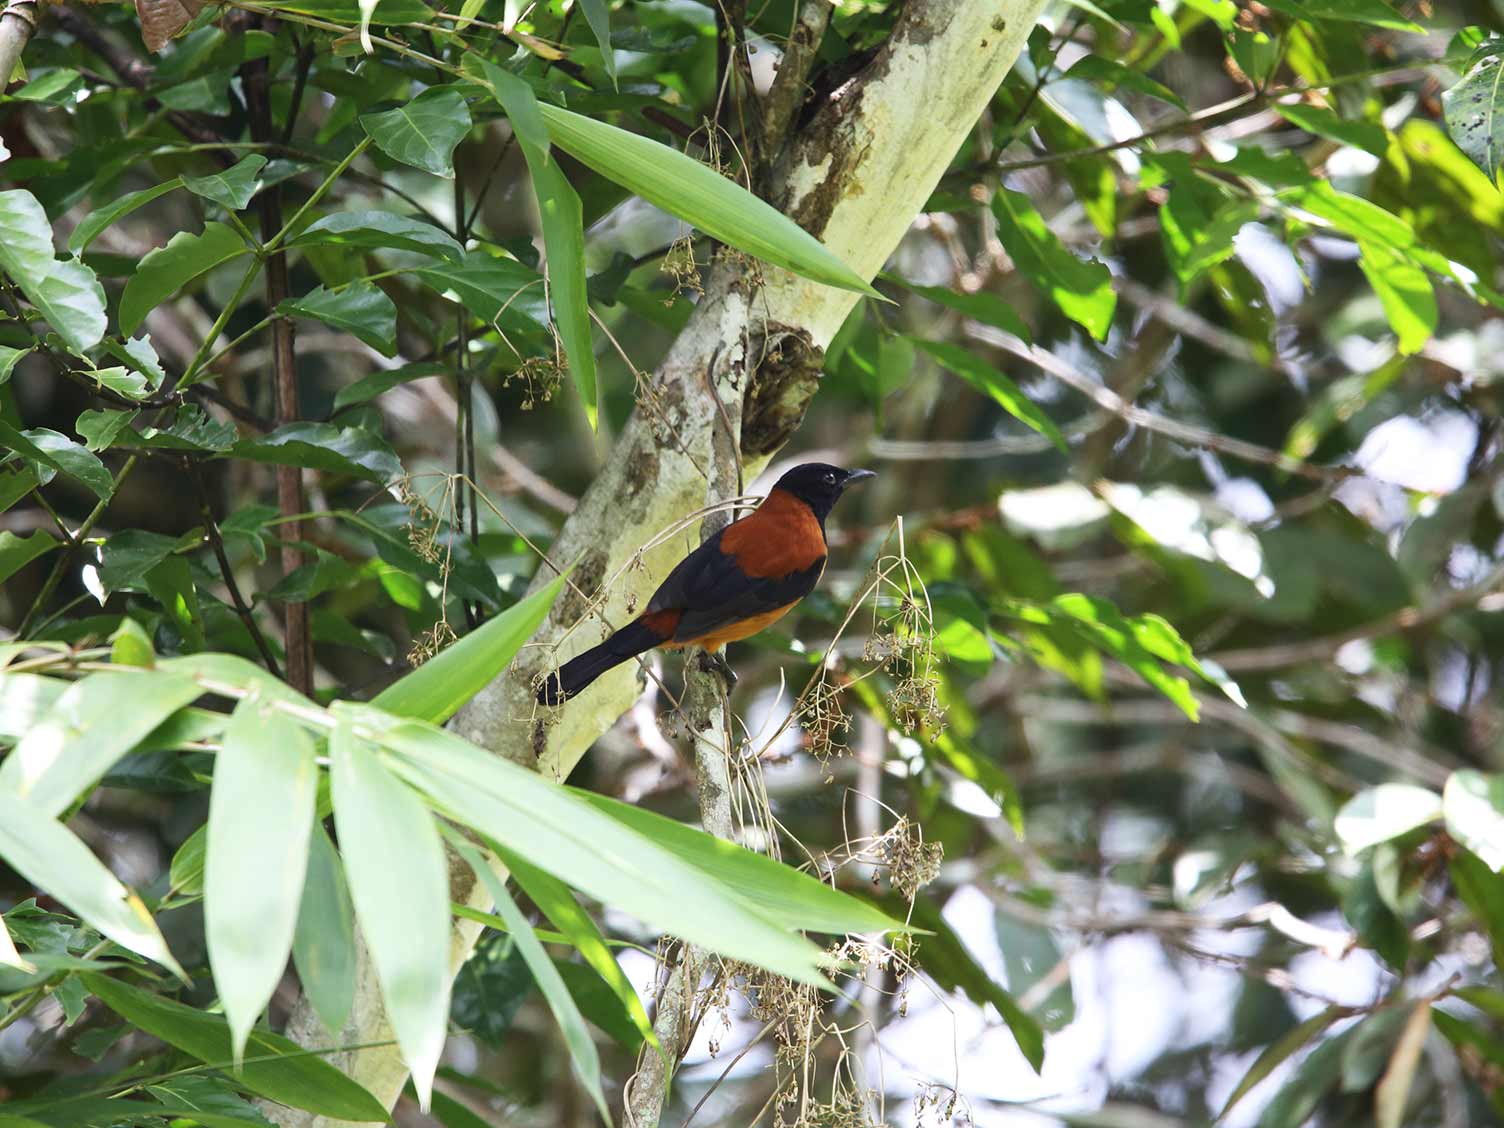 The Hooded Pitohui